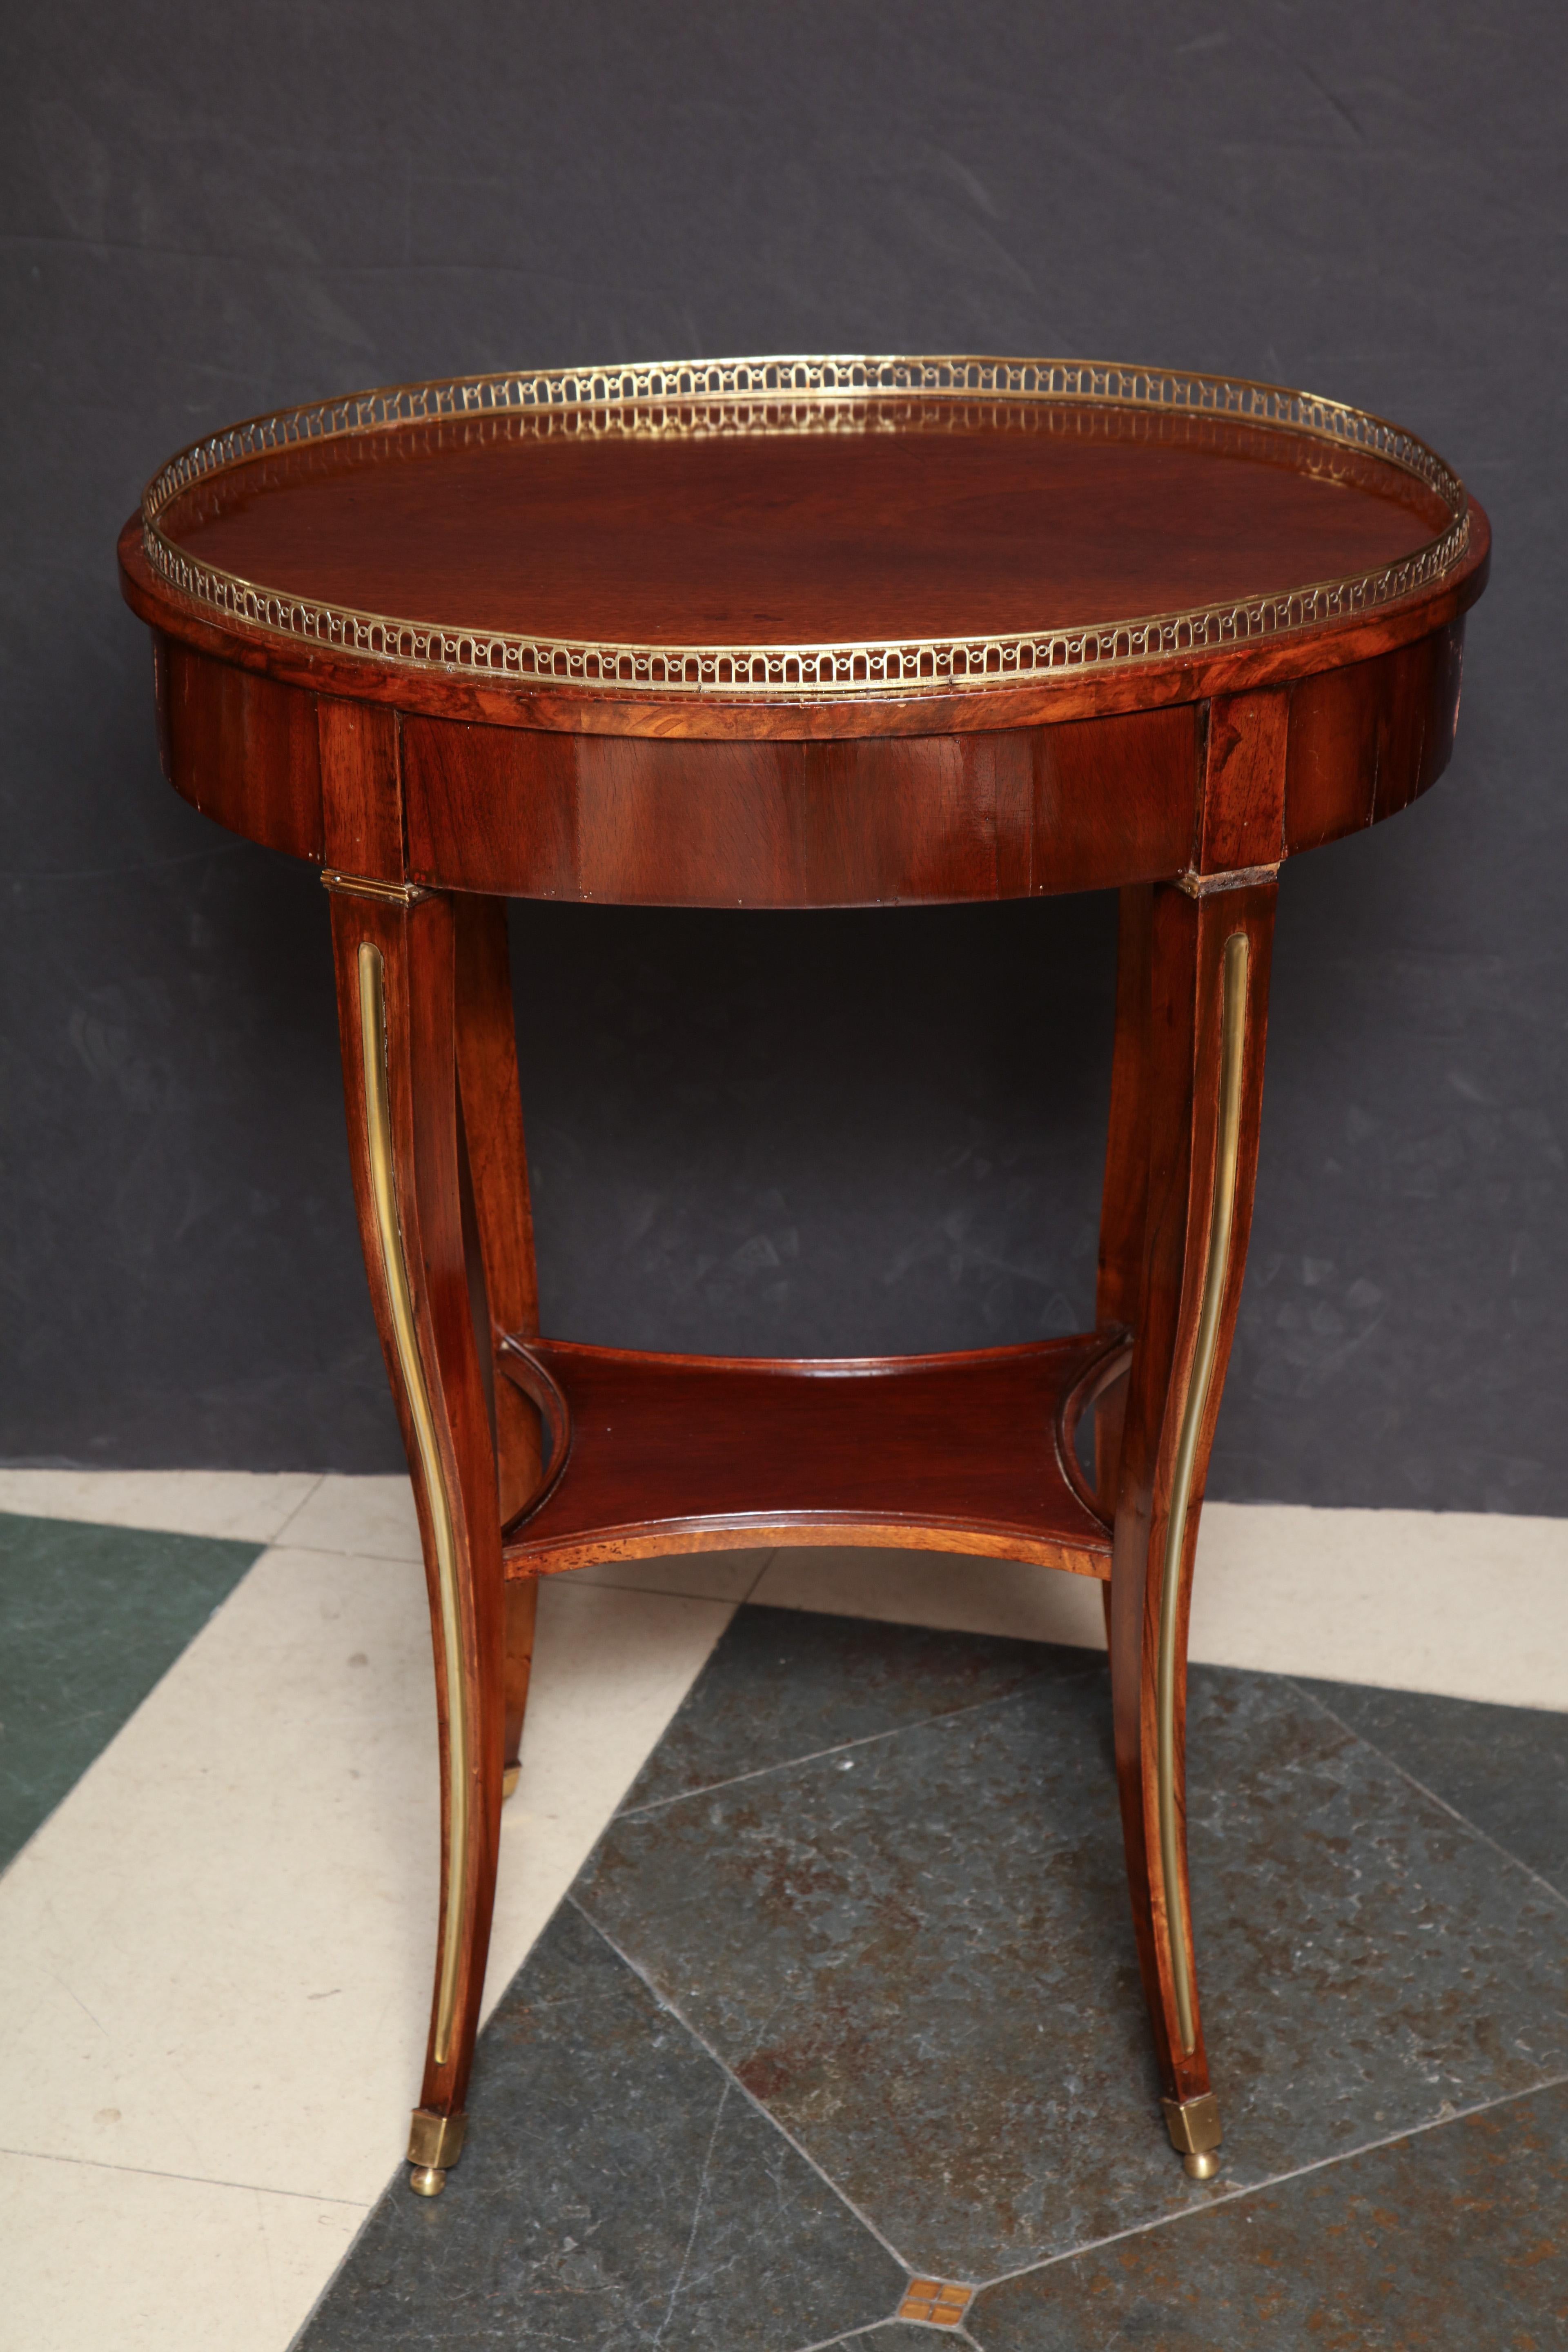 A fine Russian neoclassic oval mahogany side table with a pierced bronze gallery, brass fluted sweeping legs, and shelf stretcher base. Having a single drawer and bronze feet.